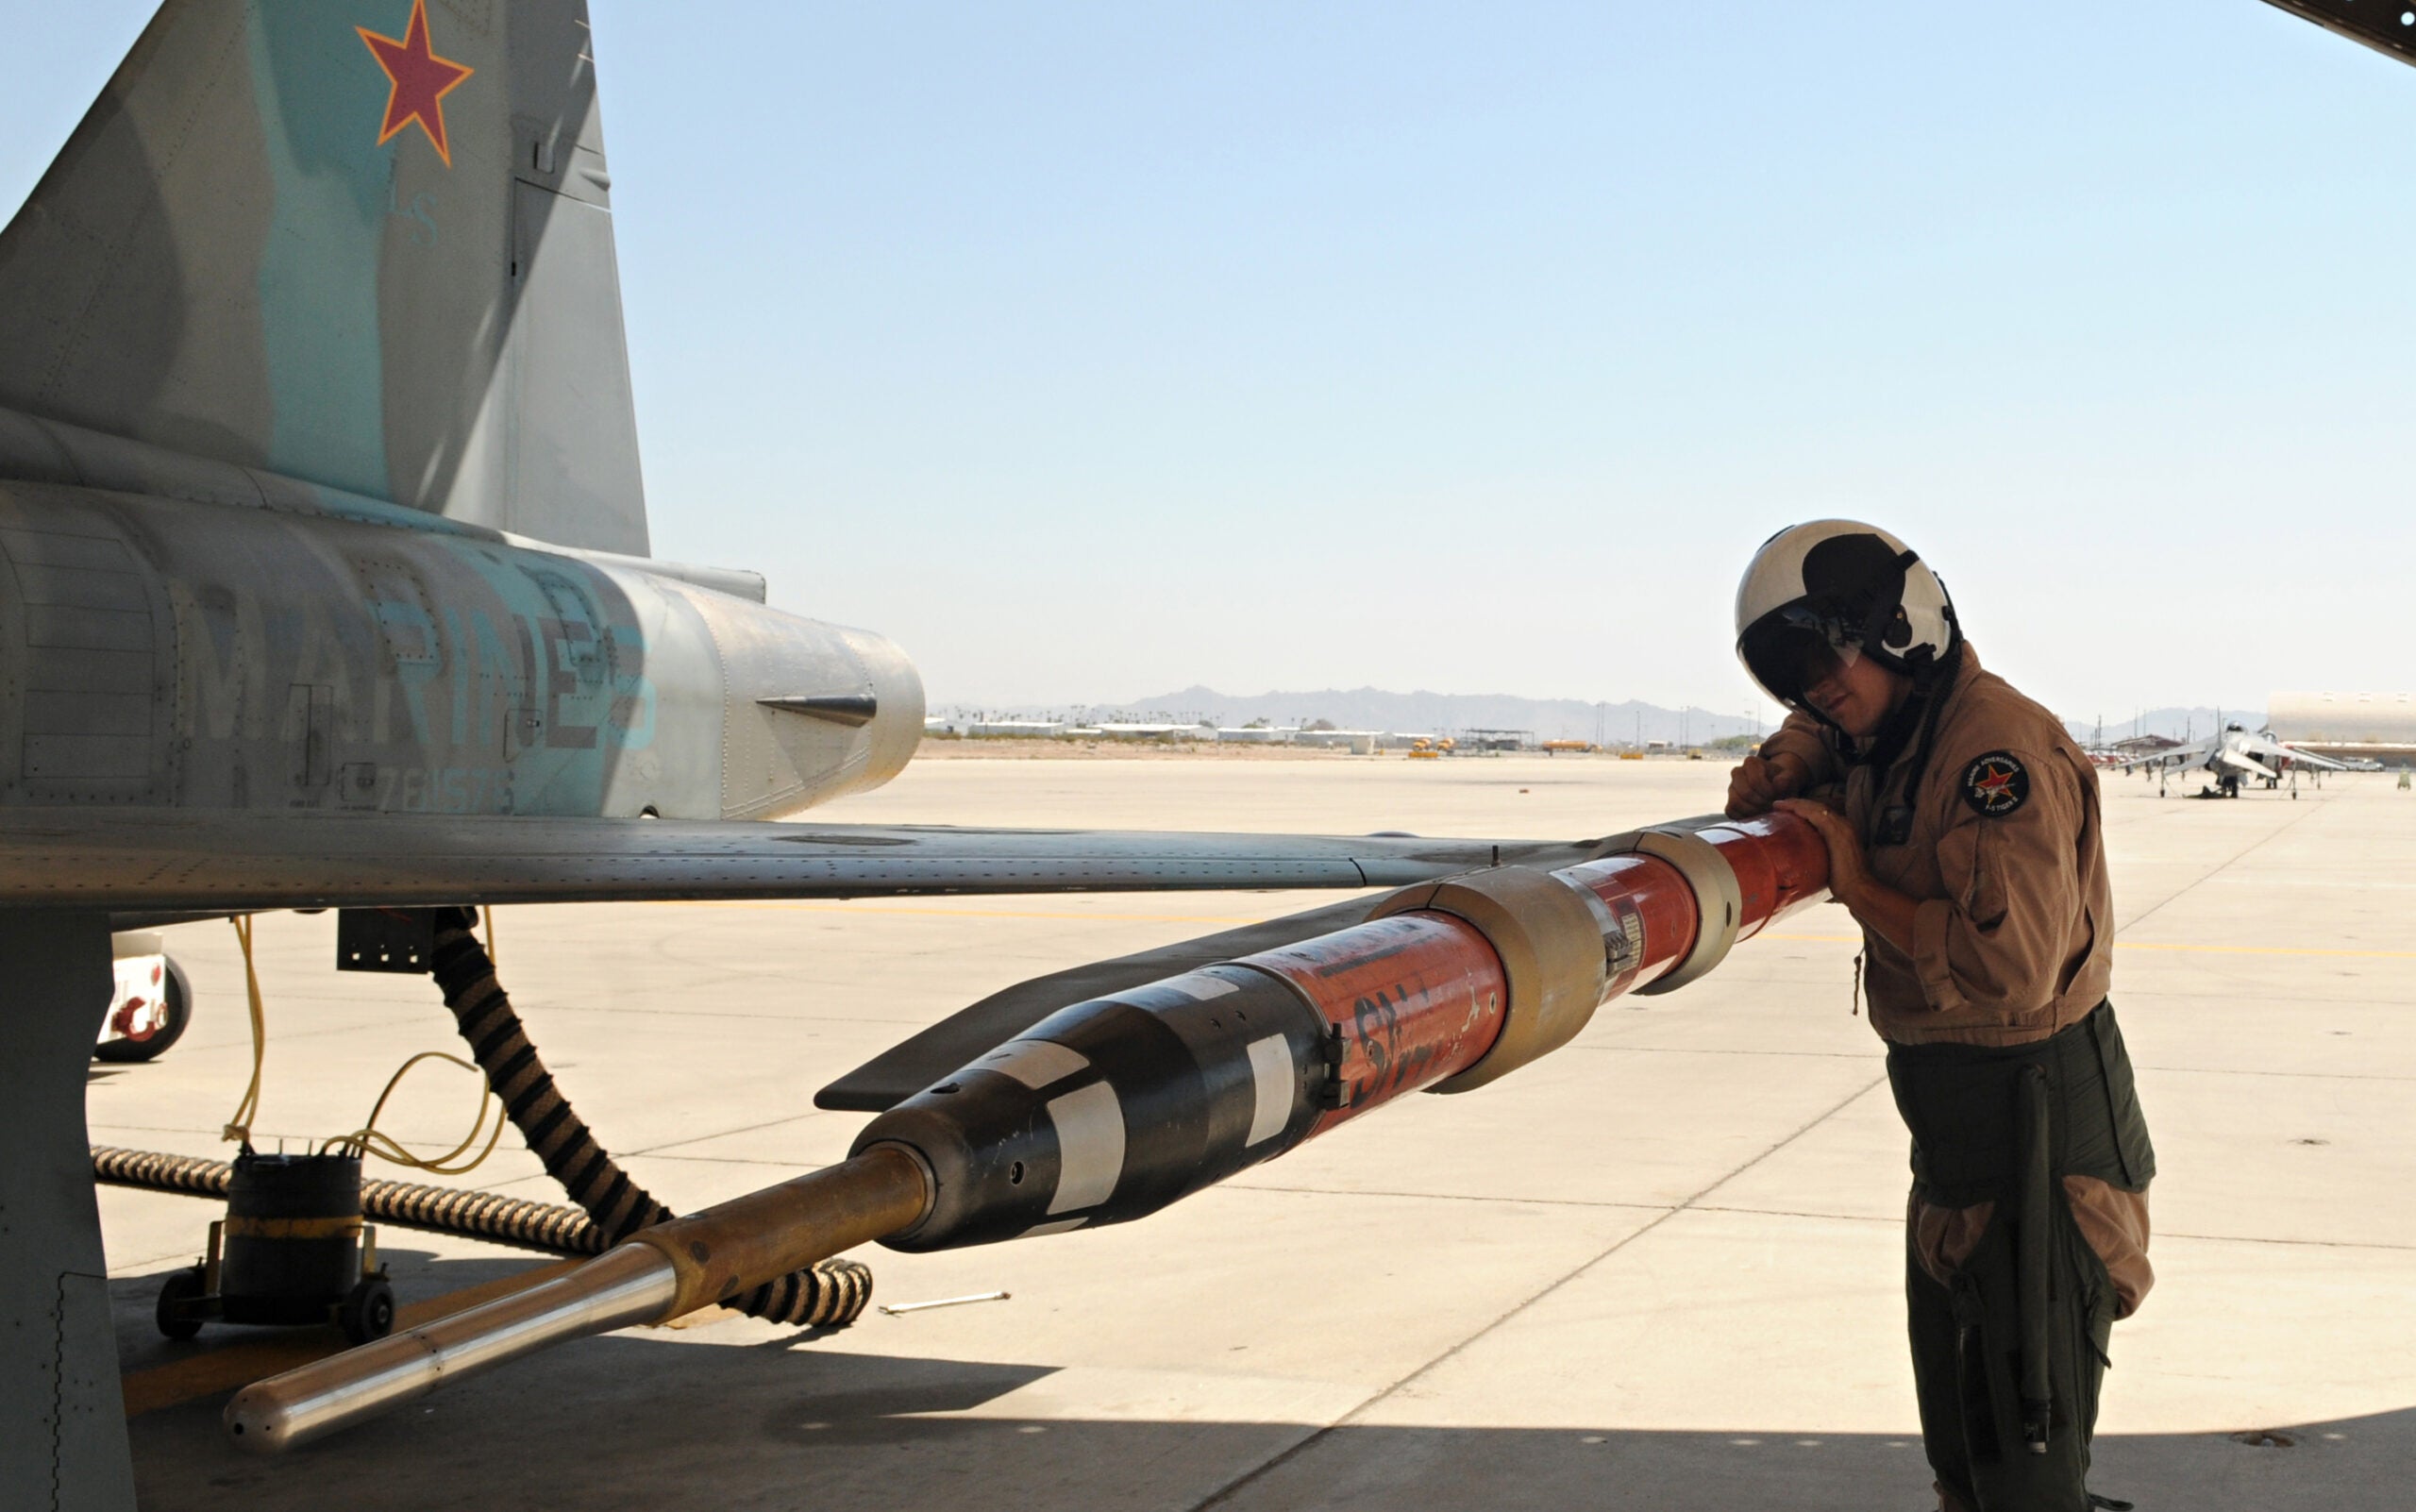 Maj. Chris Holloway, Marine Fighter Training Squadron 401 pilot, checks the placement of a tactical combat training system pod on an F-5E Tiger aircraft prior to takeoff at the Marine Corps Air Station in Yuma, Ariz., Aug. 13, 2010. The pod allows the TCTS to track the movement and weapons systems of the aircraft while taking part in training exercises.